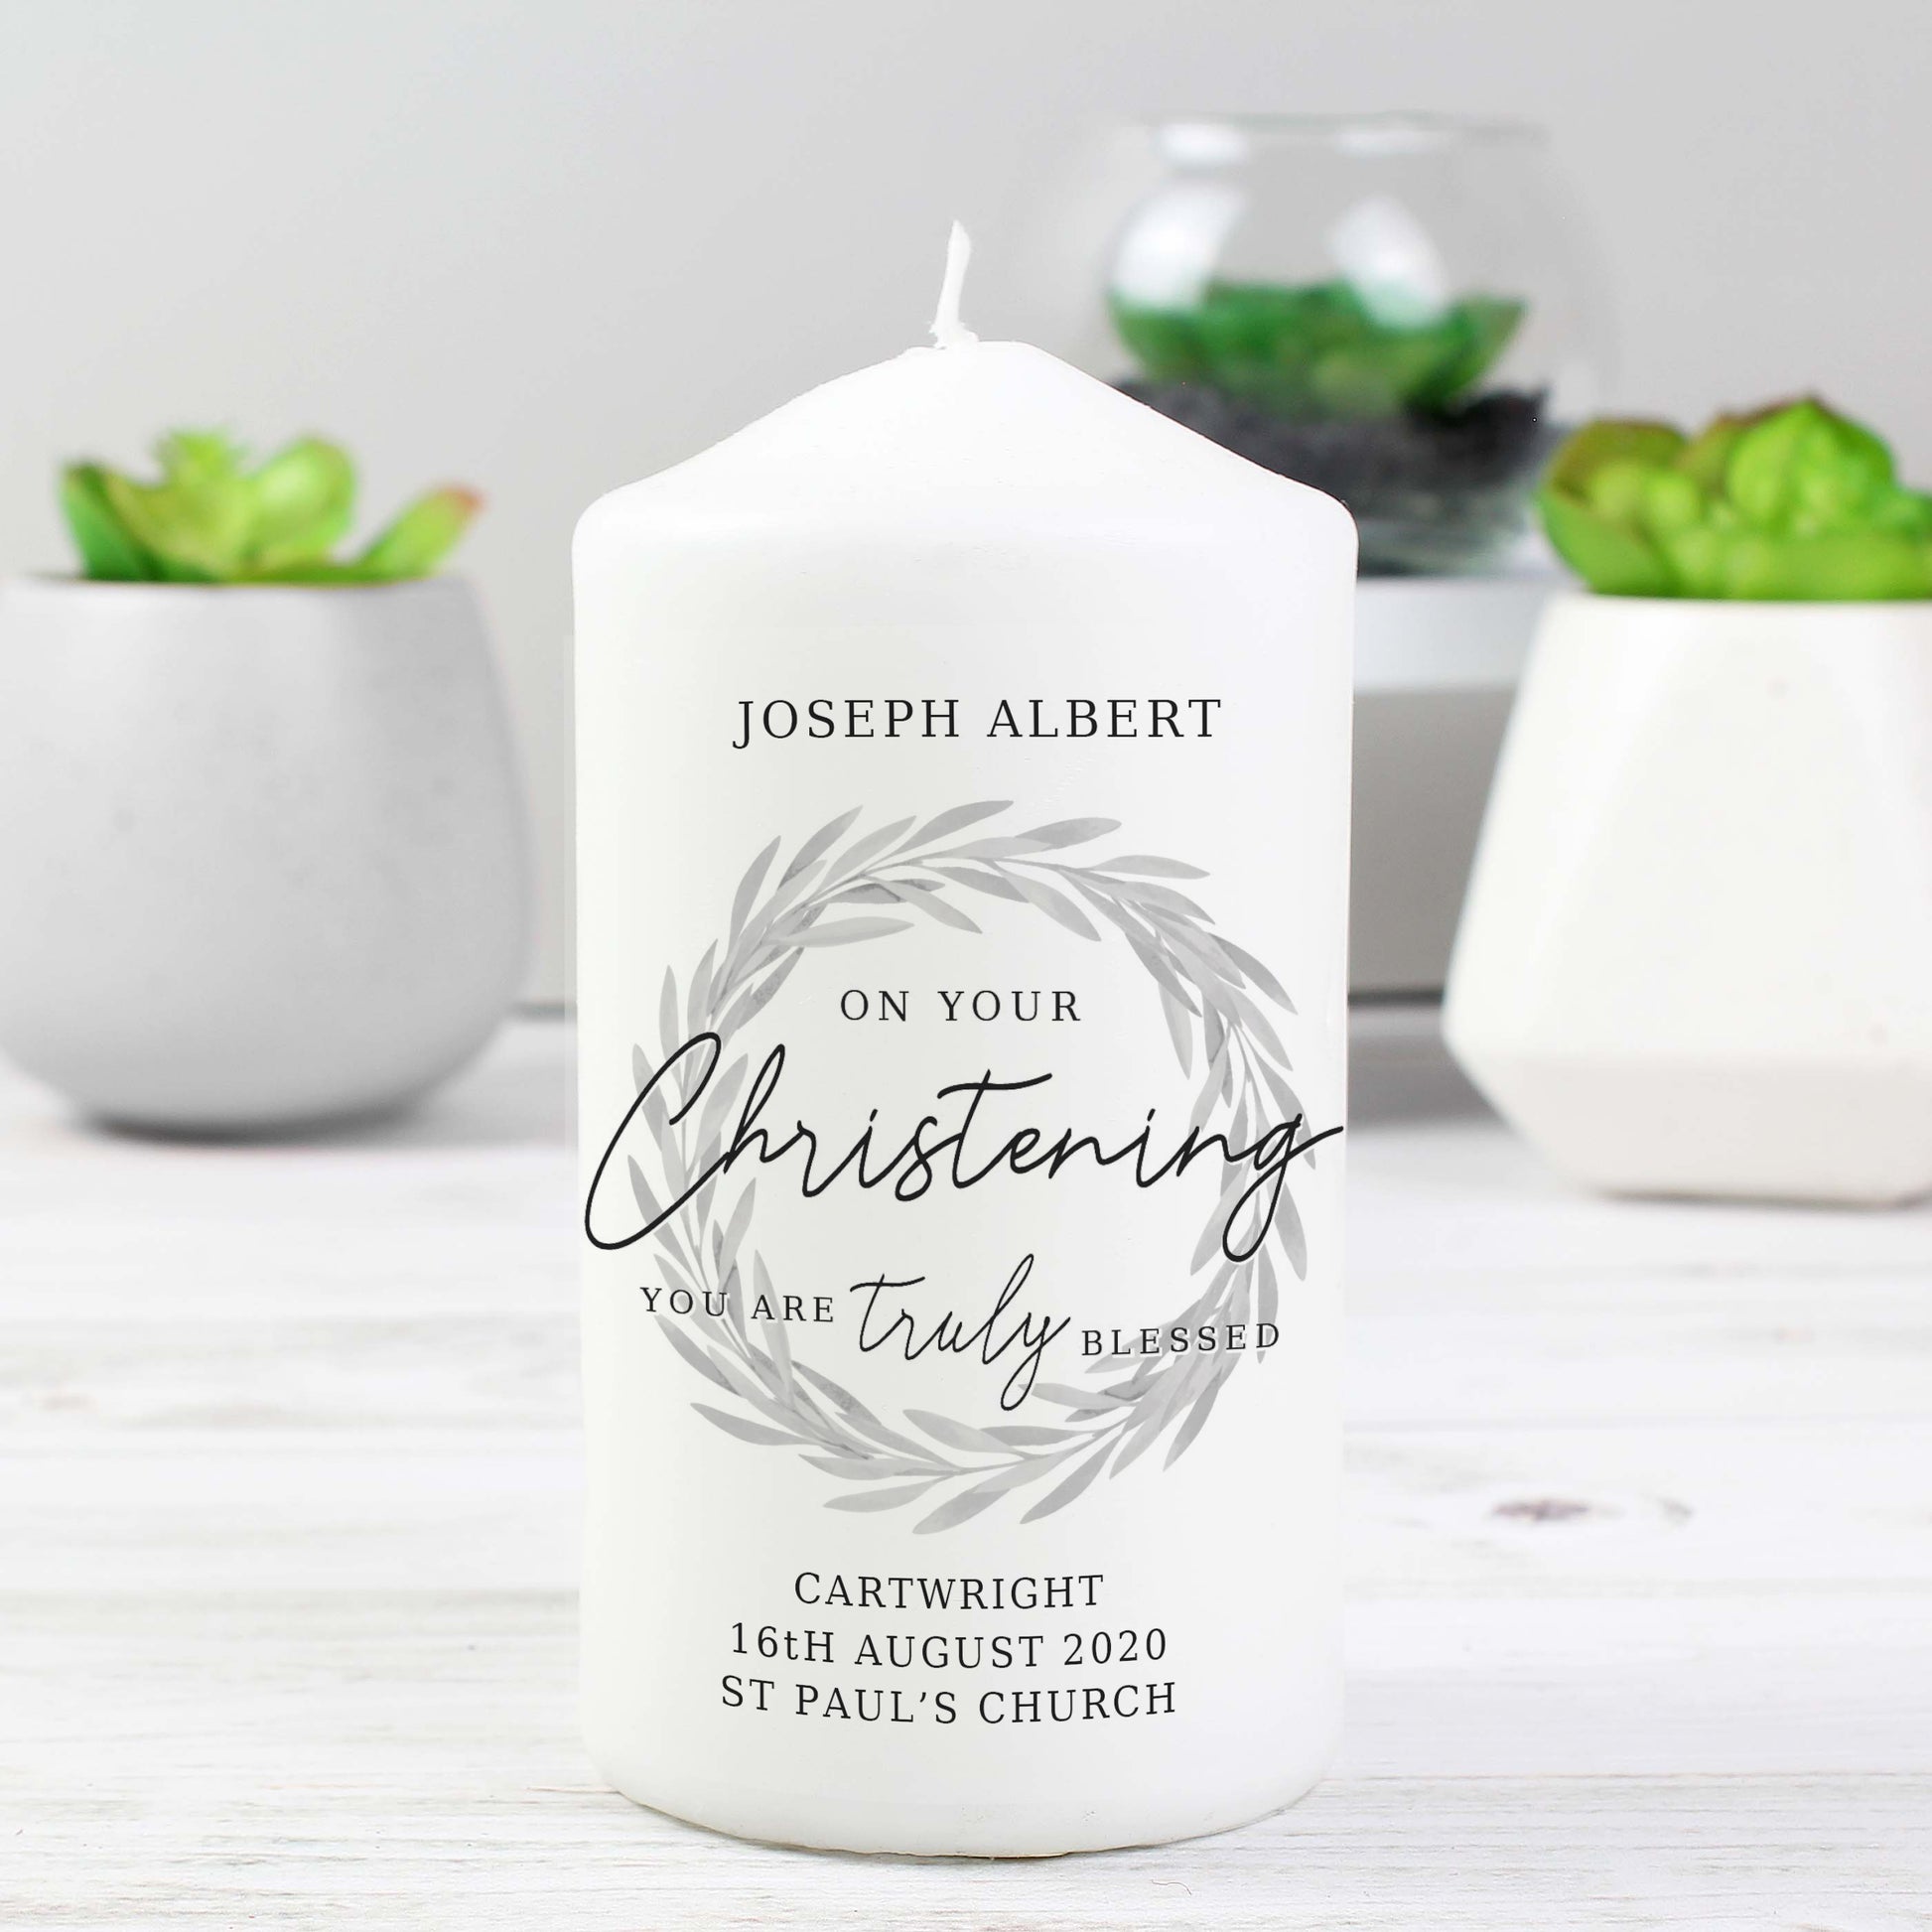 white christening candle which can be personalised with up to four lines of text, including the message "on your christening day you are truly blessed"